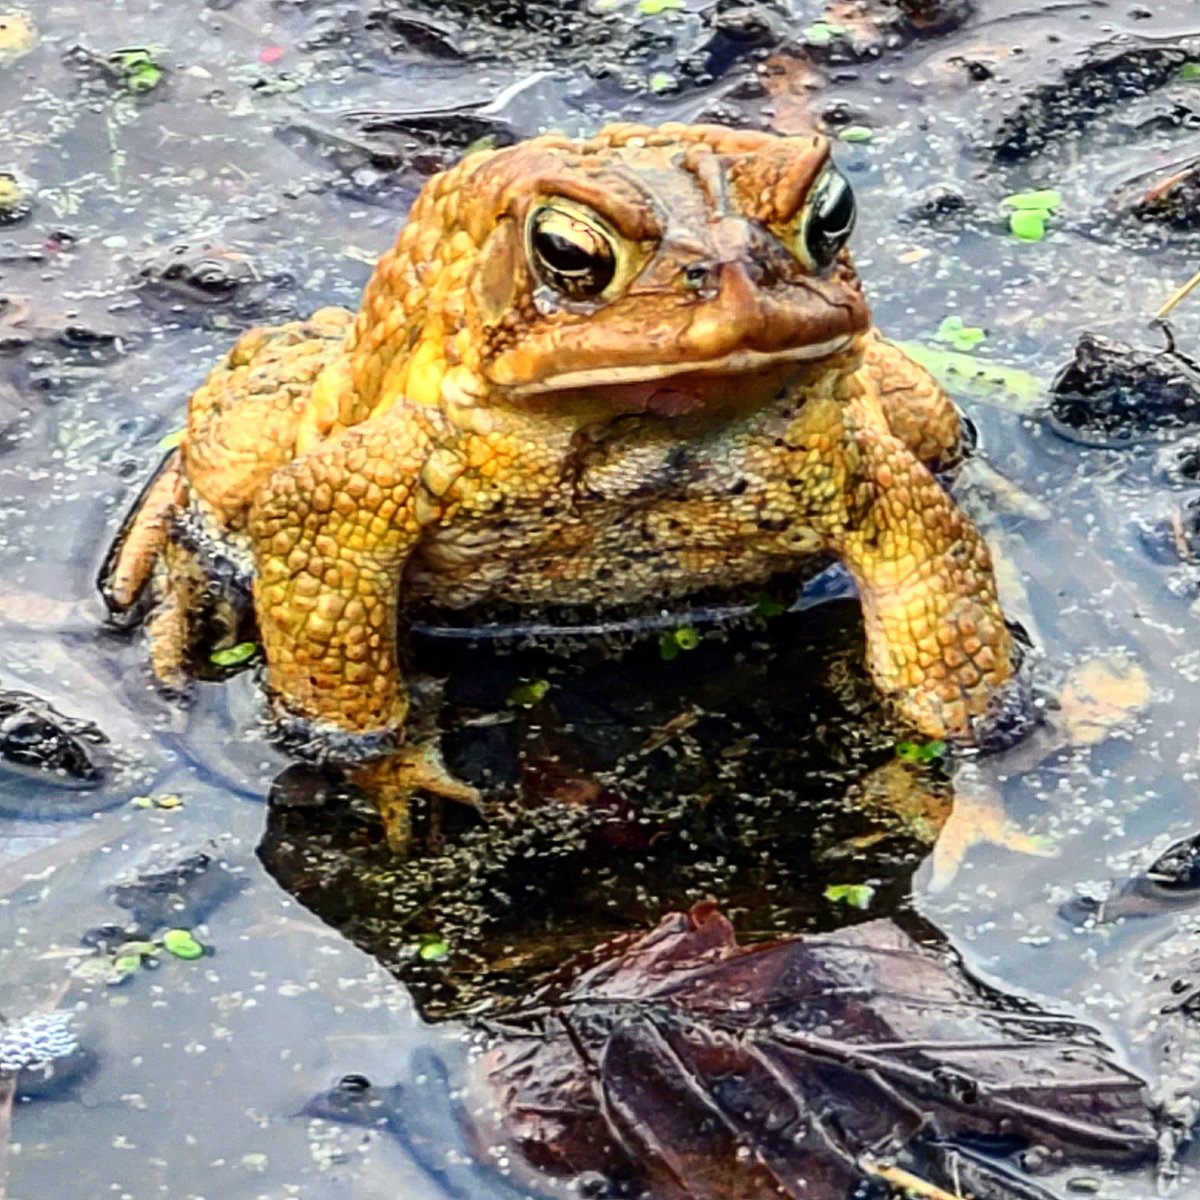 This guy wore the yellow suit instead of green wanted to stand out a (ri)bit! 🧐🧐🤔🤫🤣🤣#frogs #kermitthefrog #frogsofinstagram #frenchcreekstatepark